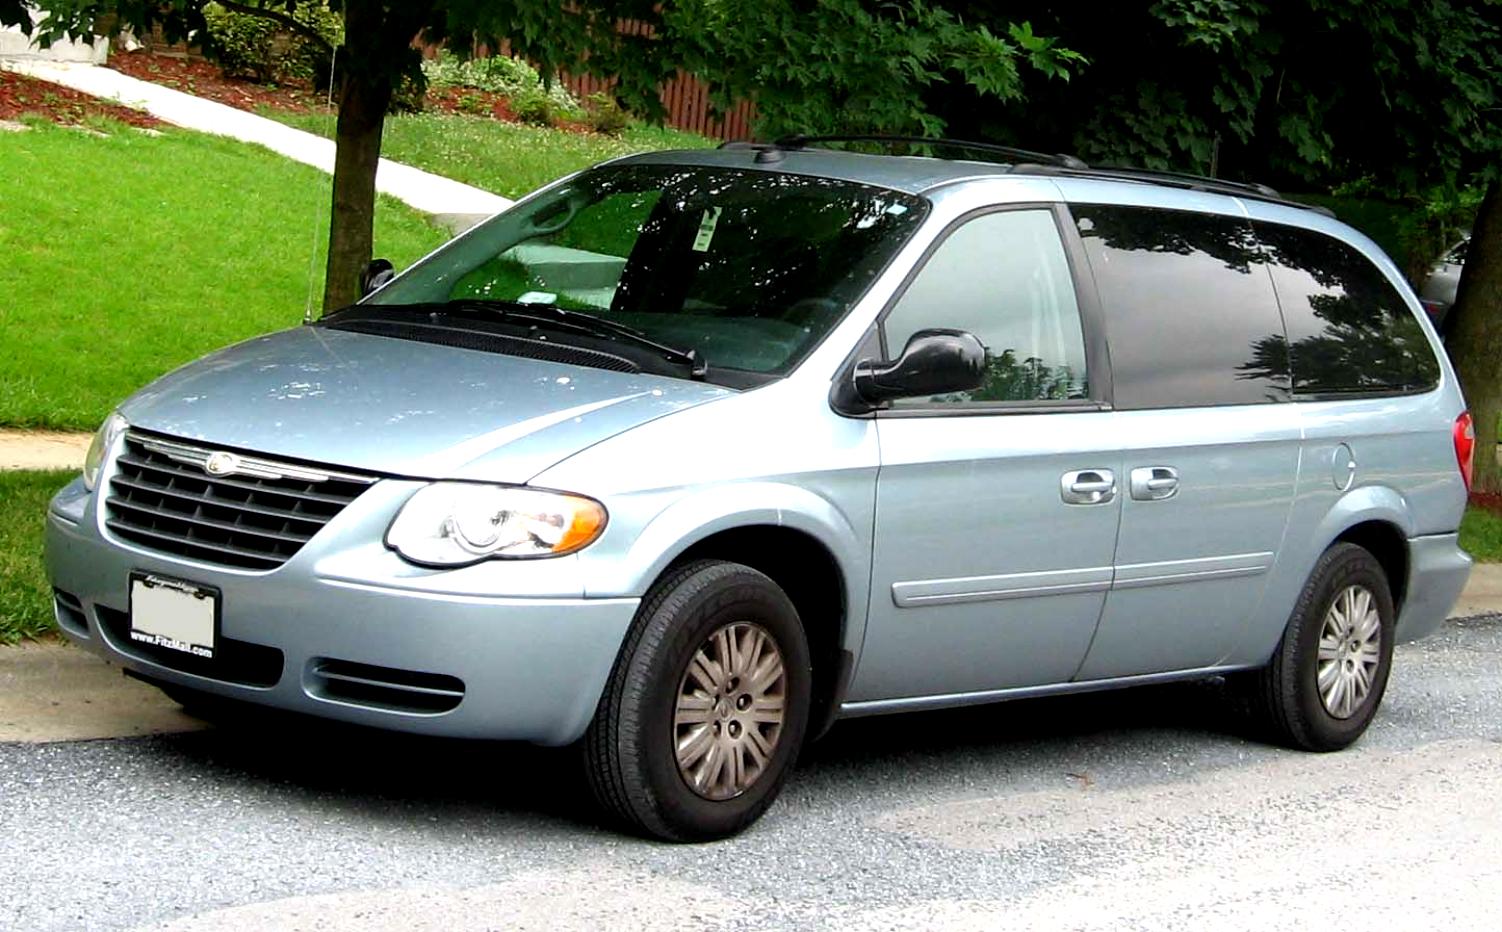 Chrysler Town & Country 2007 #2